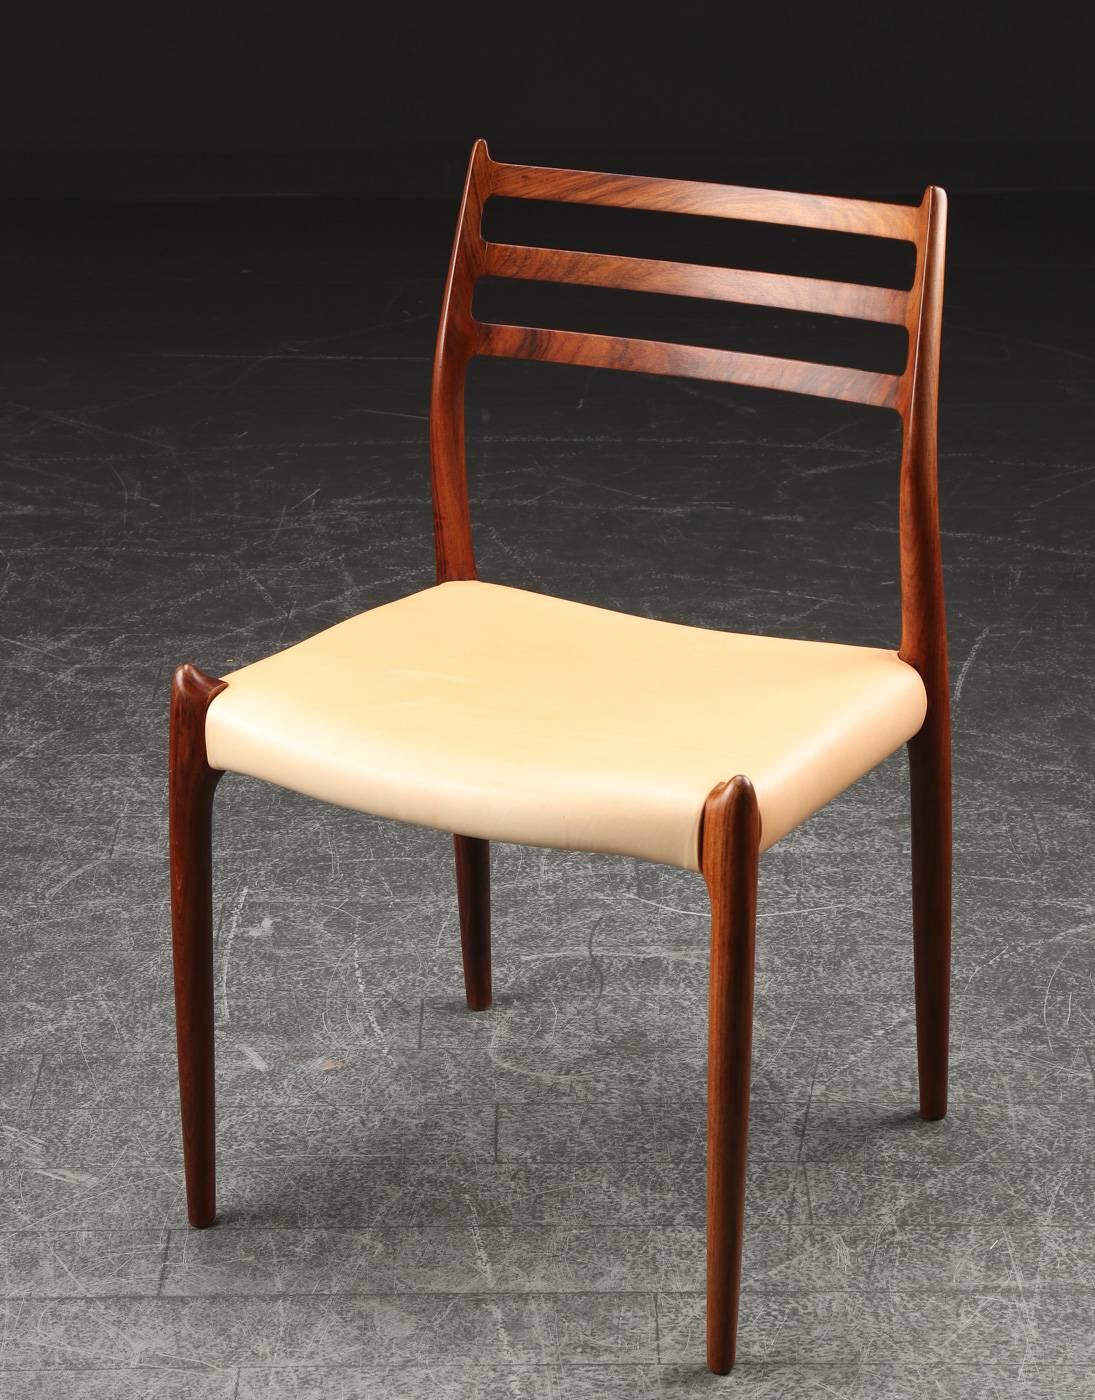 This model 78 dining chair was designed in 1954 by Niels O. Møller for J.L. Møllers Møbelfabrik. 

The chair is organically-shaped and is evidence of what great designers and brilliant cabinetmakers can achieve.

The chair is newly upholstered in